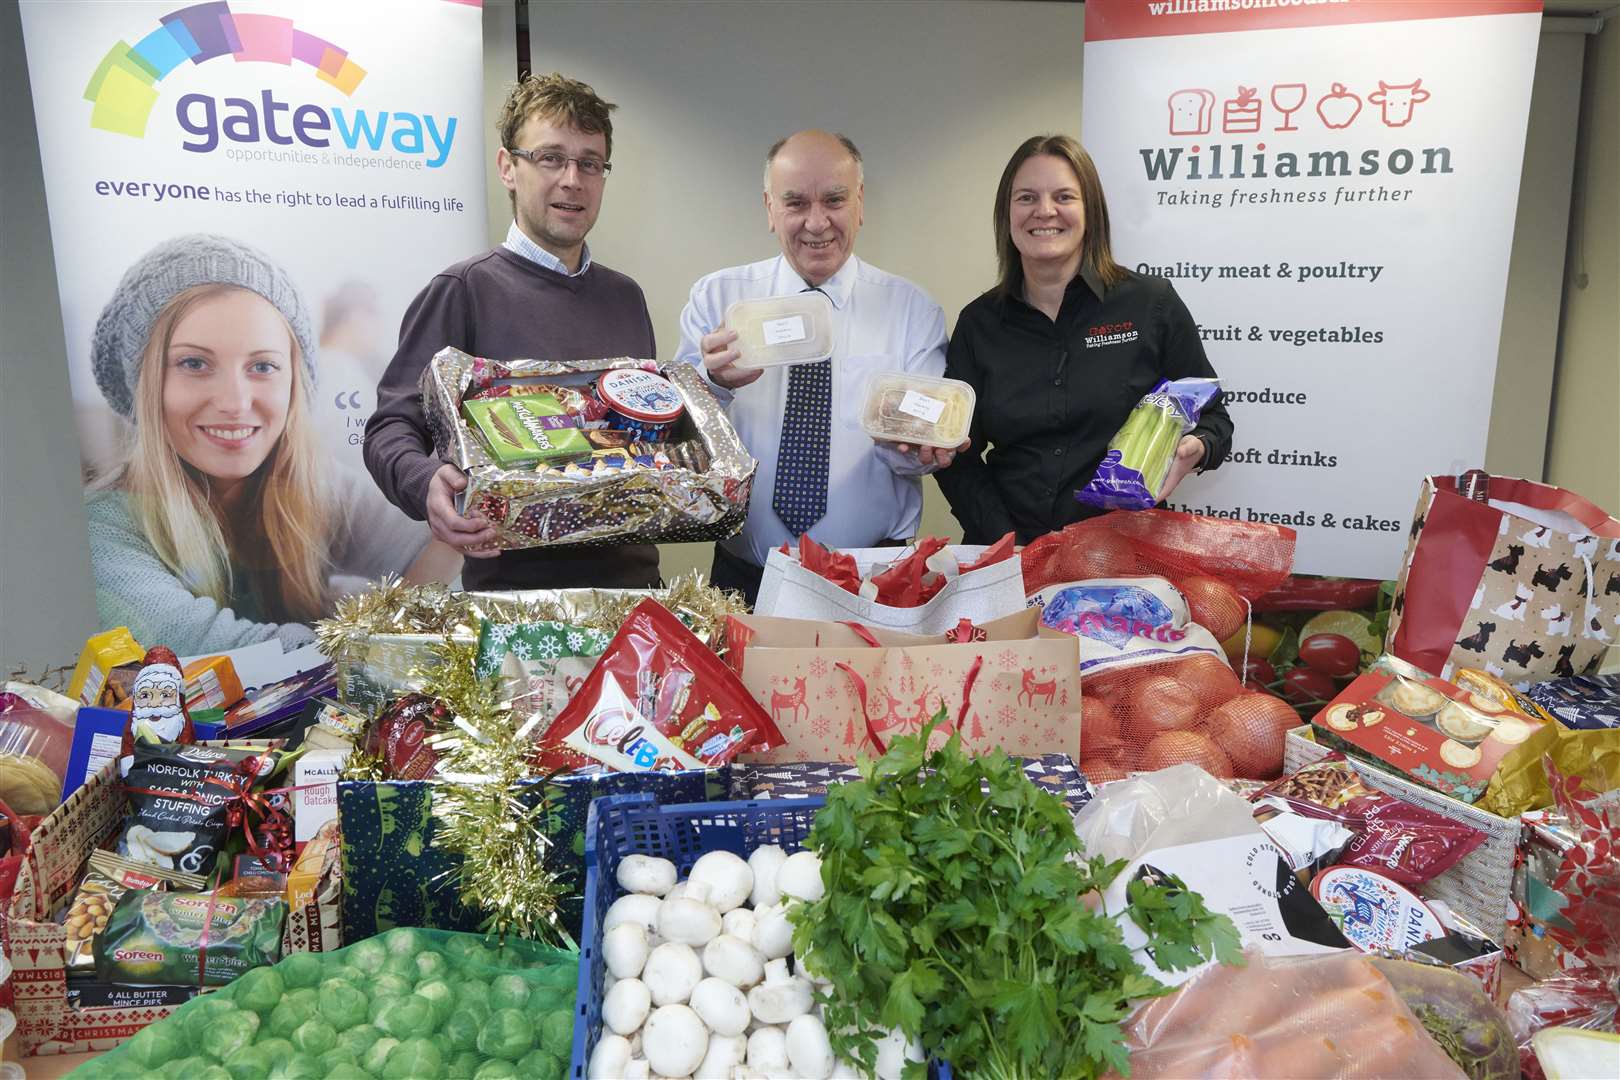 From left: Craig Riddle (Gateway finance manager), David Sutherland (Food For Families founder) and Louise Beattie (sales manager Williamson Foodservice).